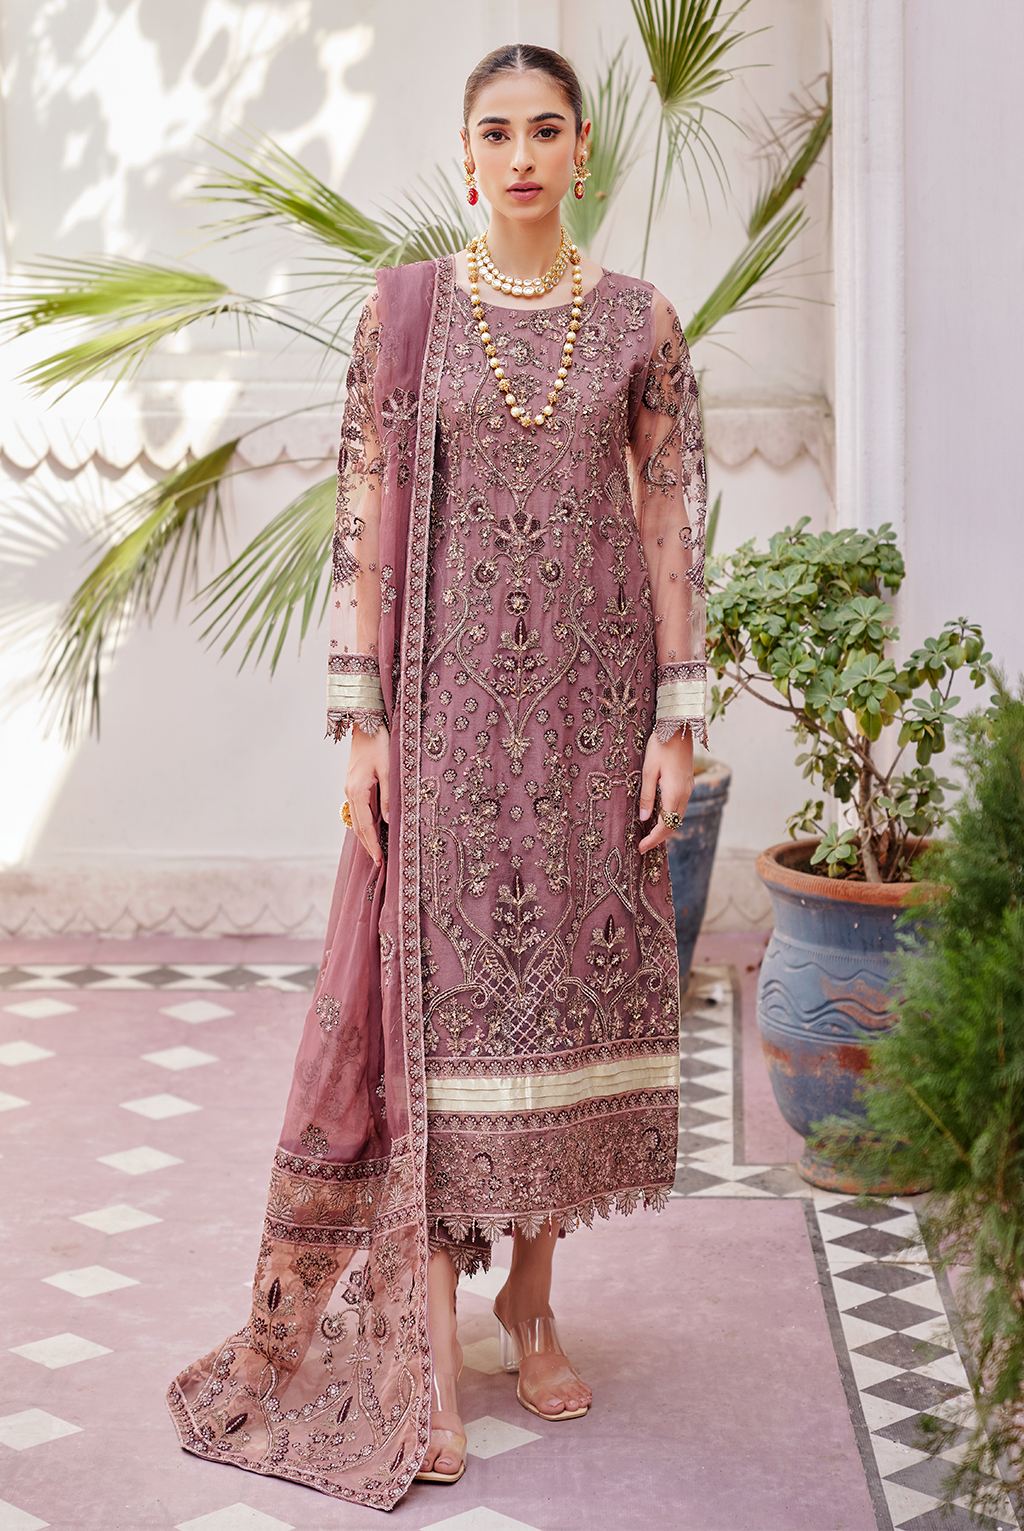 Luxe Chiffon by Emaan Adeel (LX 10)